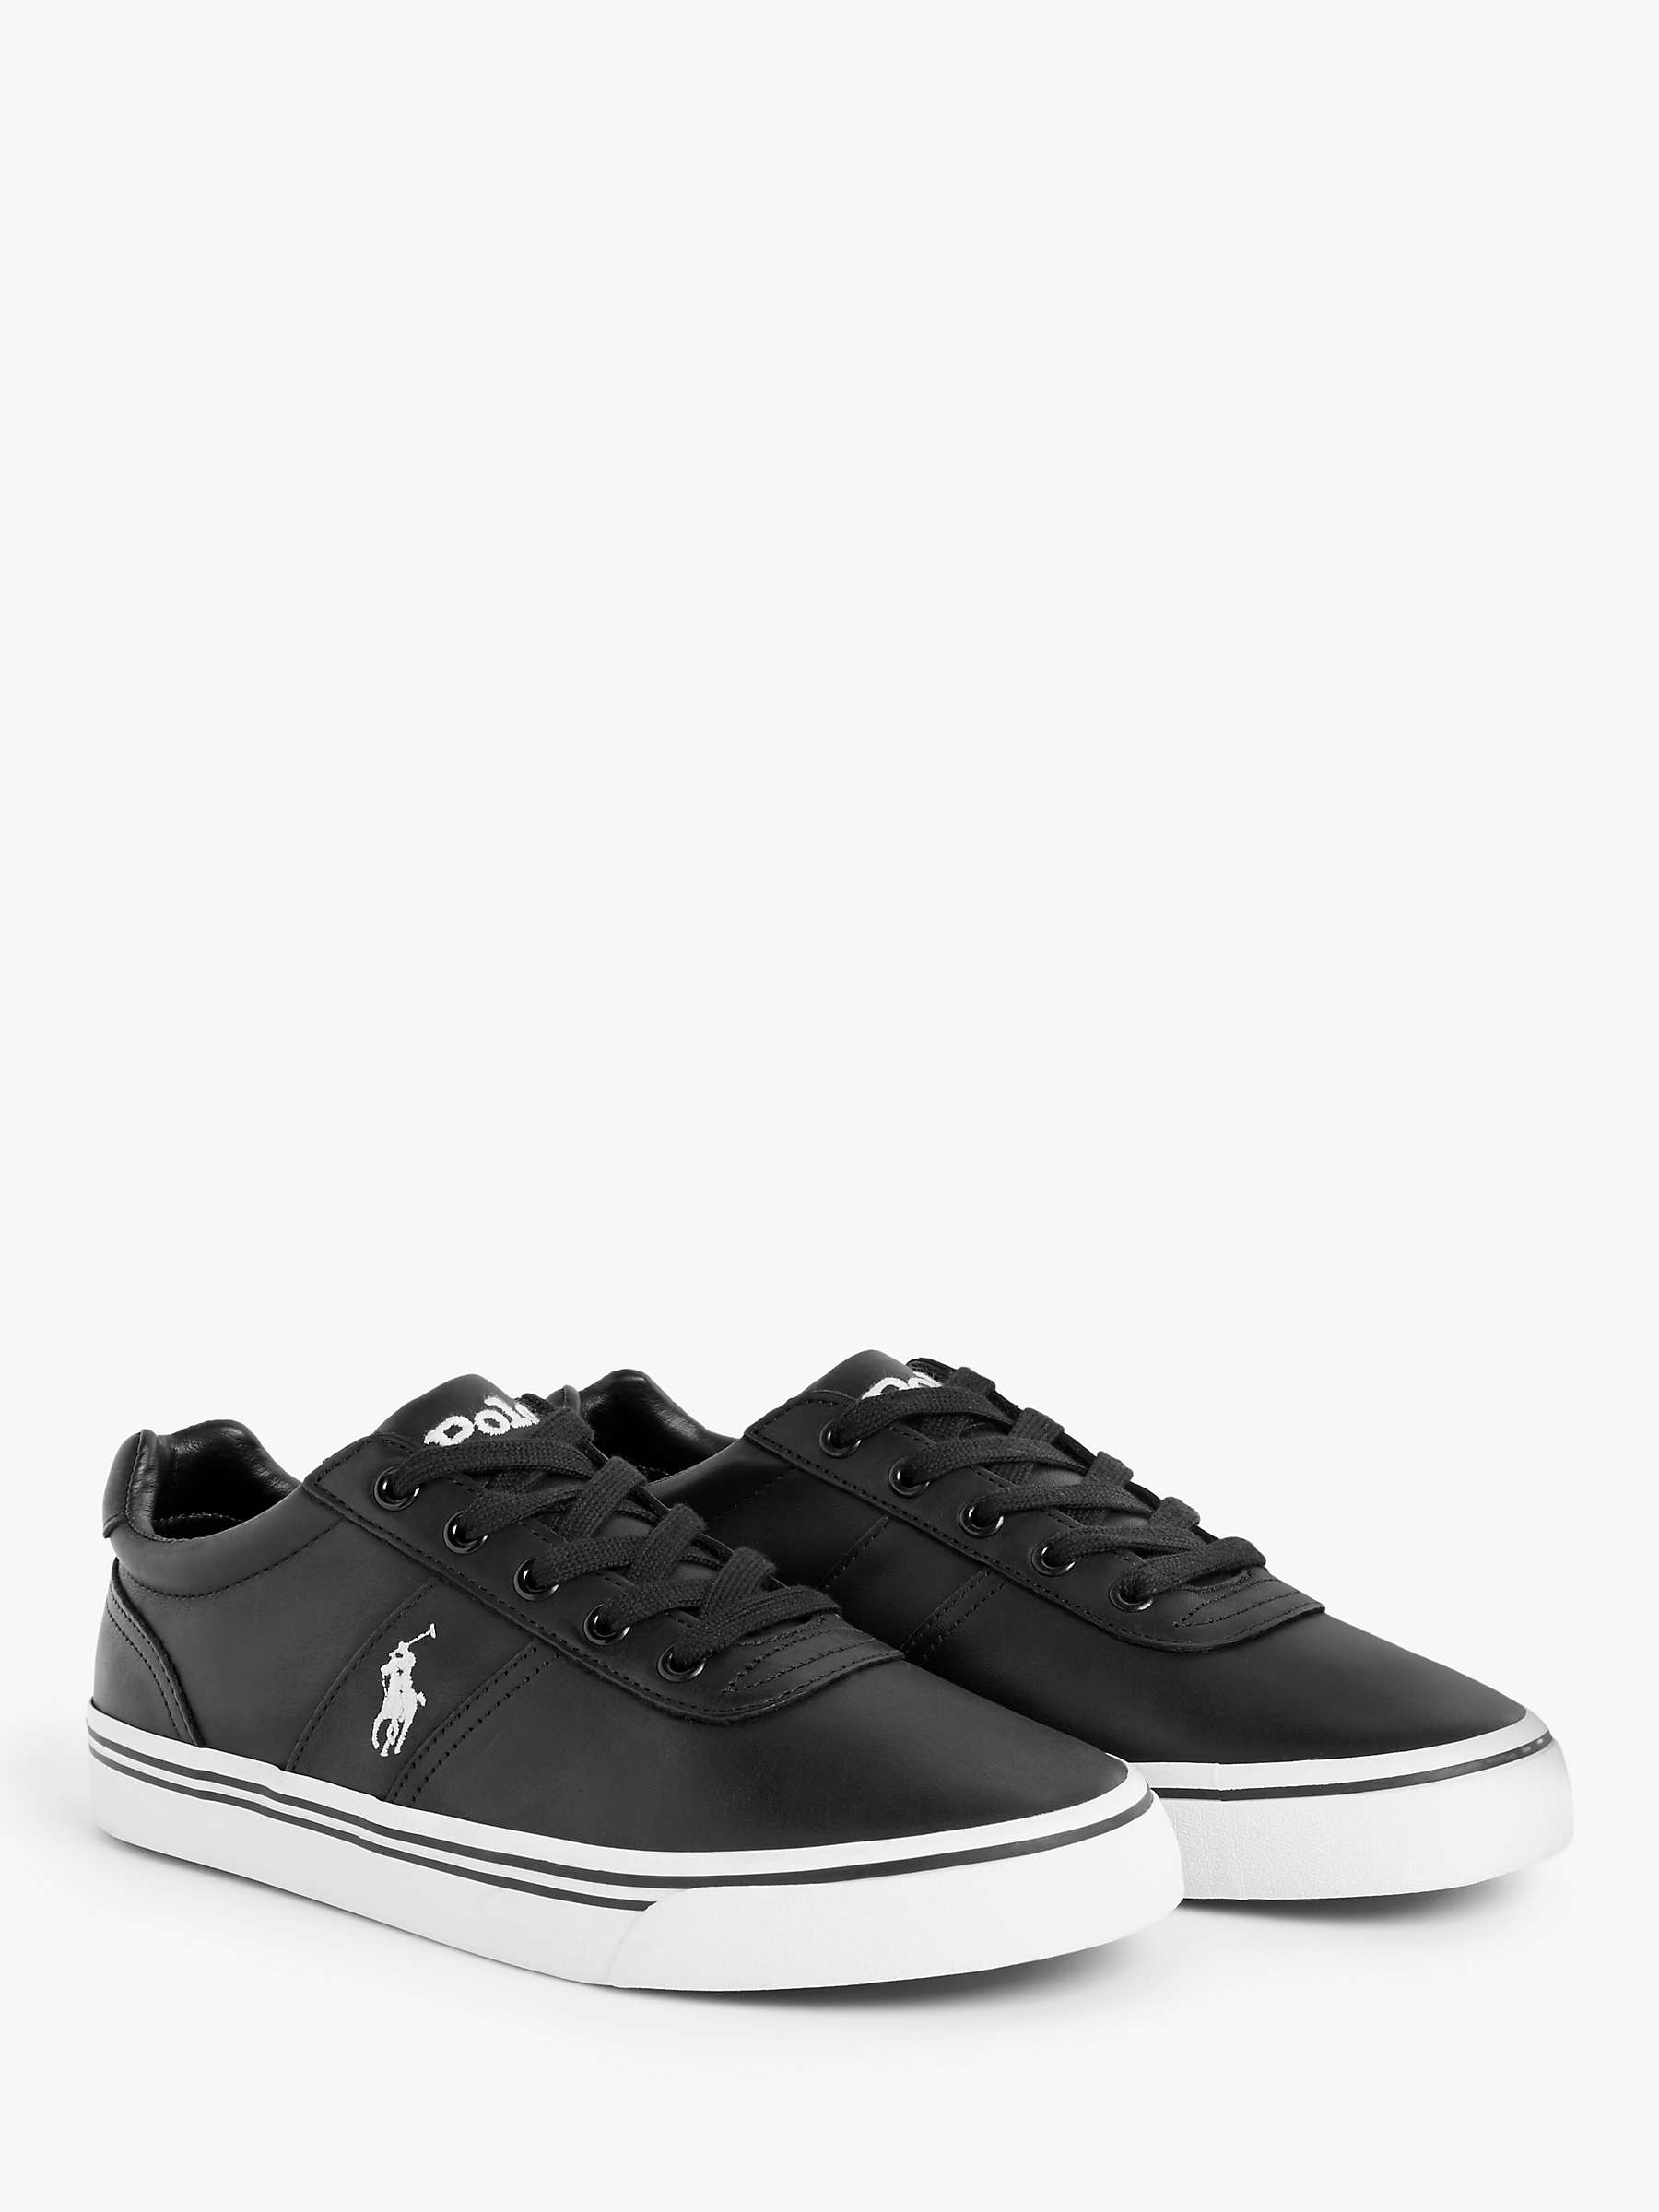 Buy Polo Ralph Lauren Hanford Leather Trainers Online at johnlewis.com